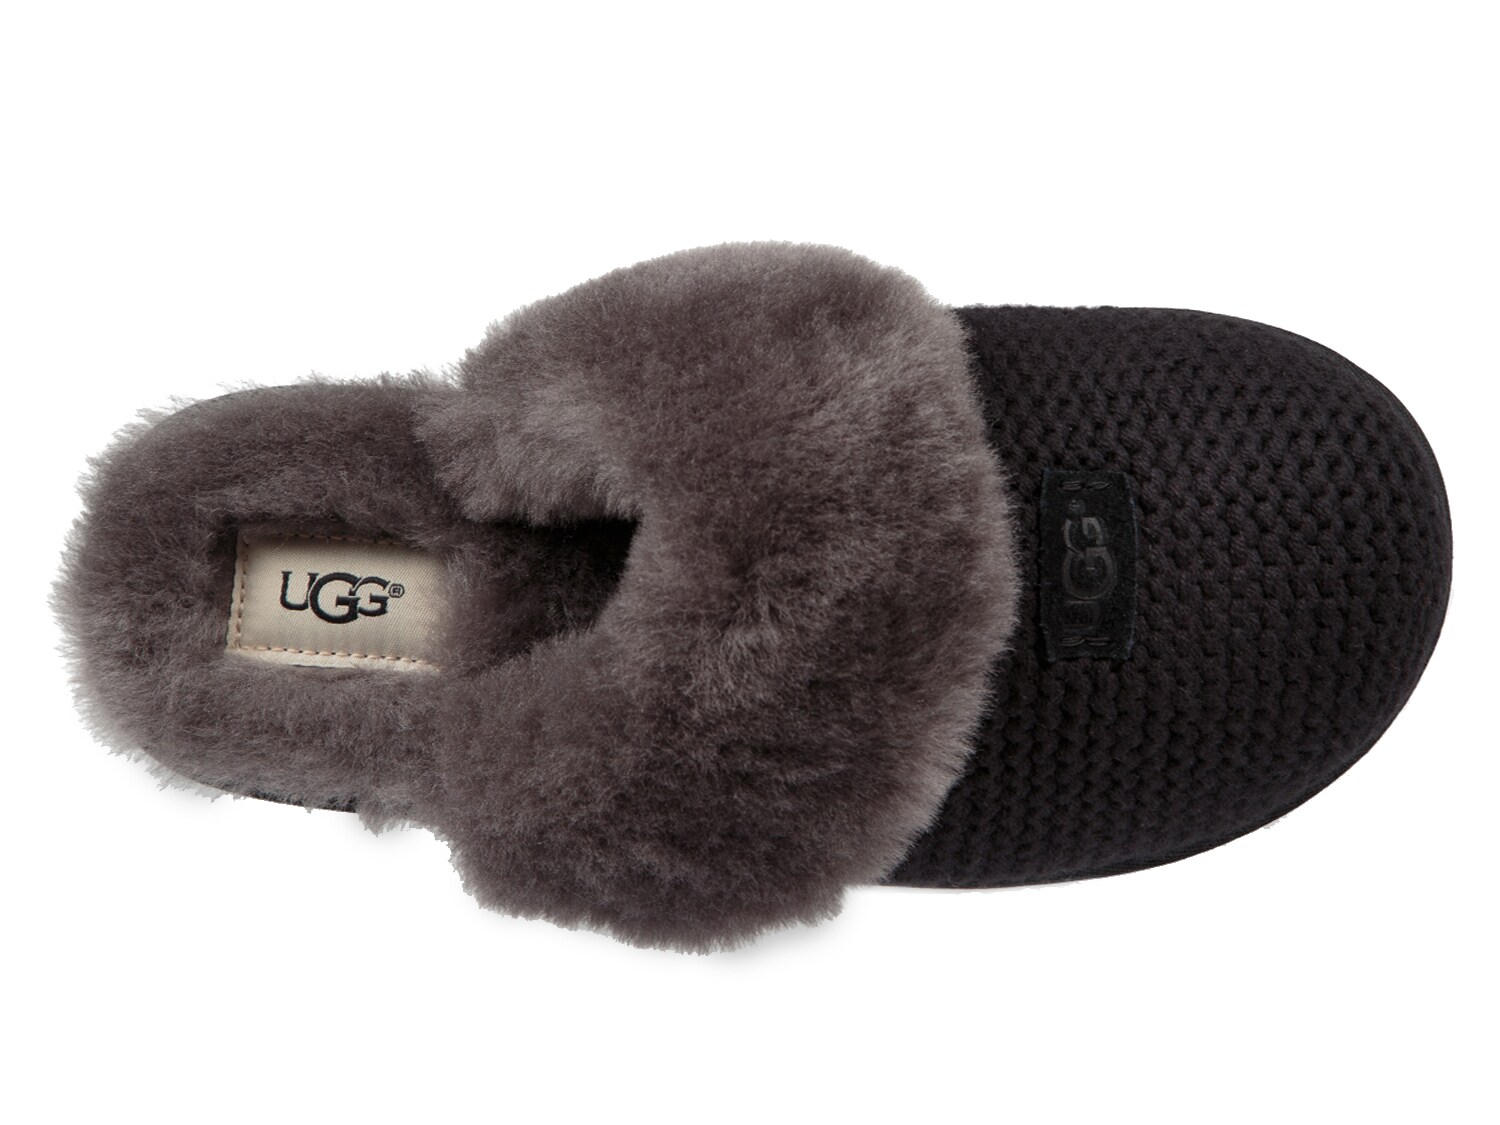 ugg cozy slippers size 5